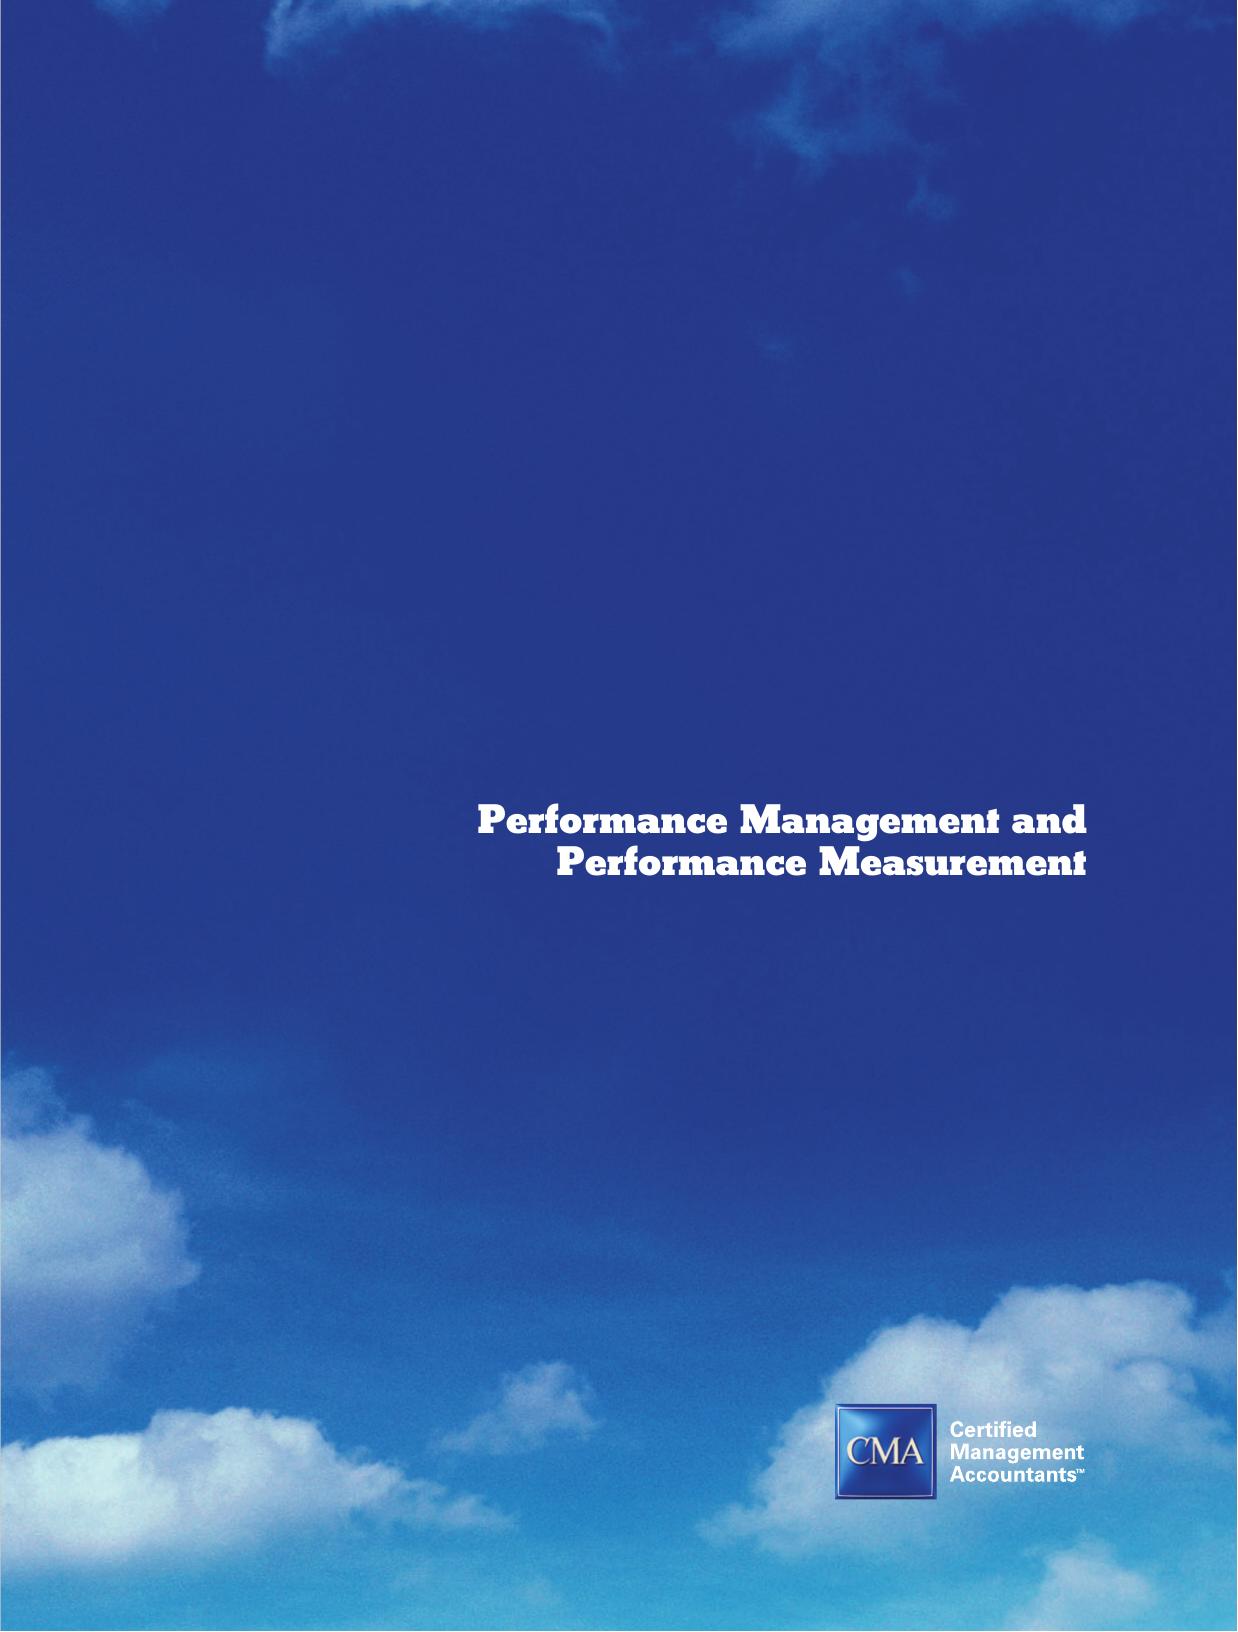 Performance Management and Performance Measurement 2010